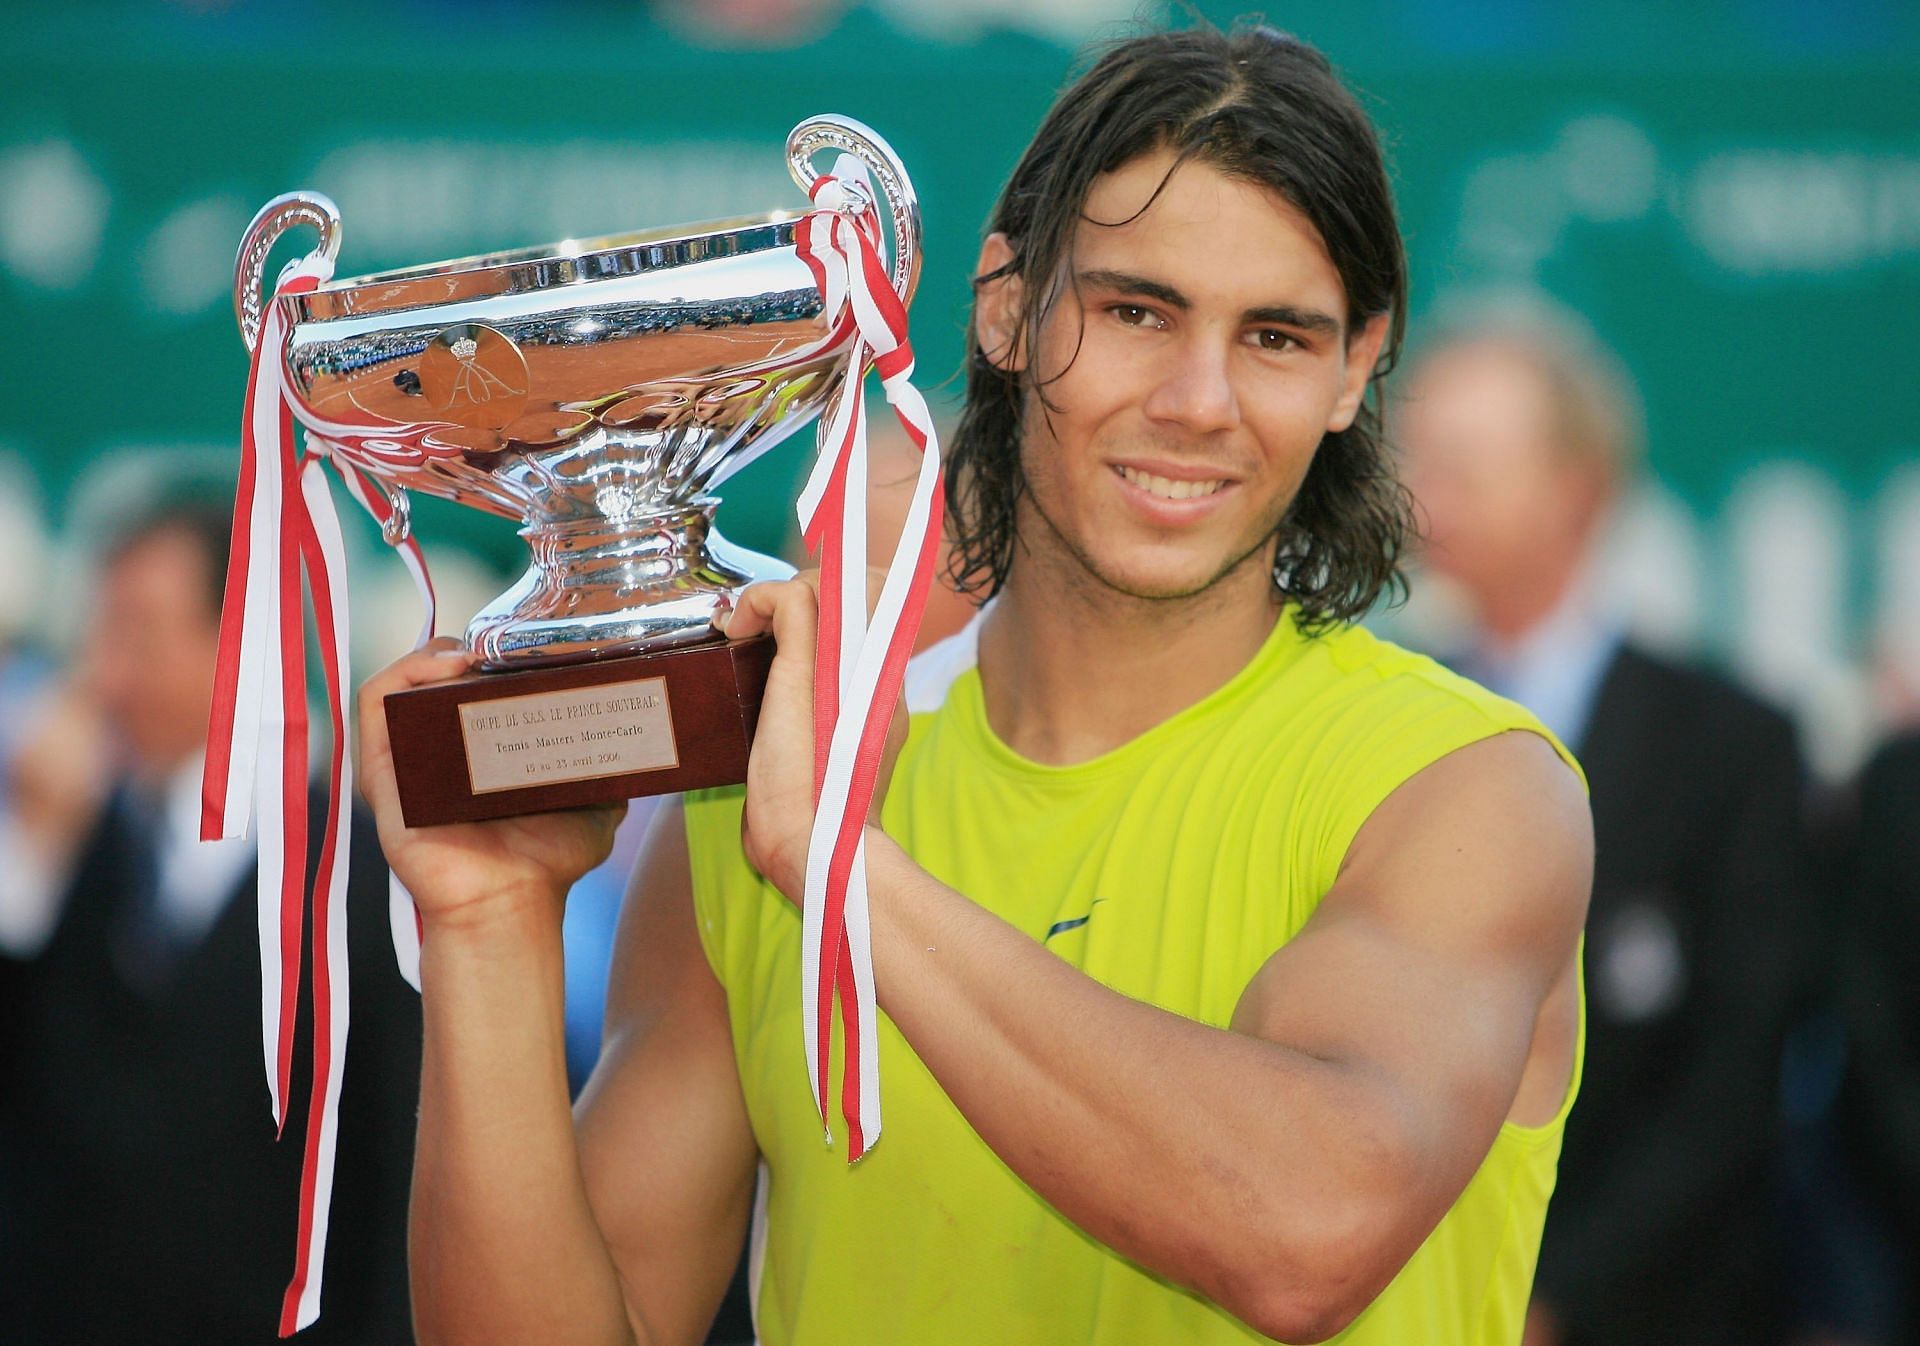 Rafael Nadal was the last player to defend his first Masters 1000 title before Stefanos Tsitsipas